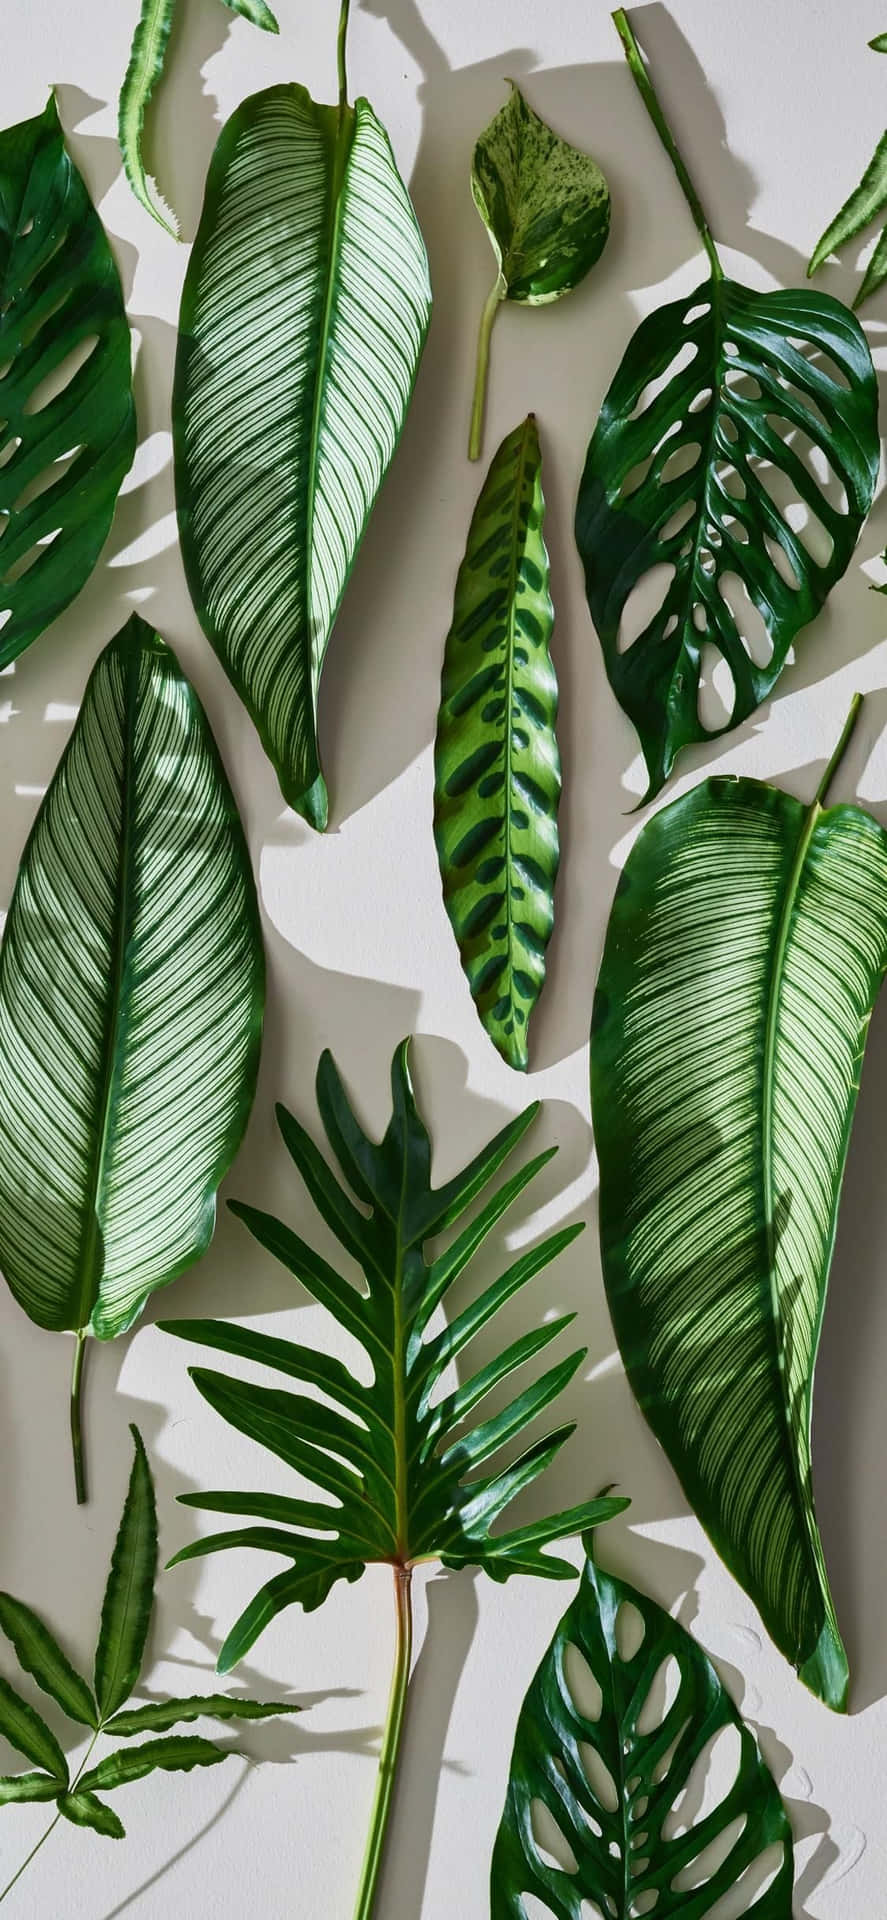 Enjoy a touch of nature with this Plant Aesthetic Phone Wallpaper